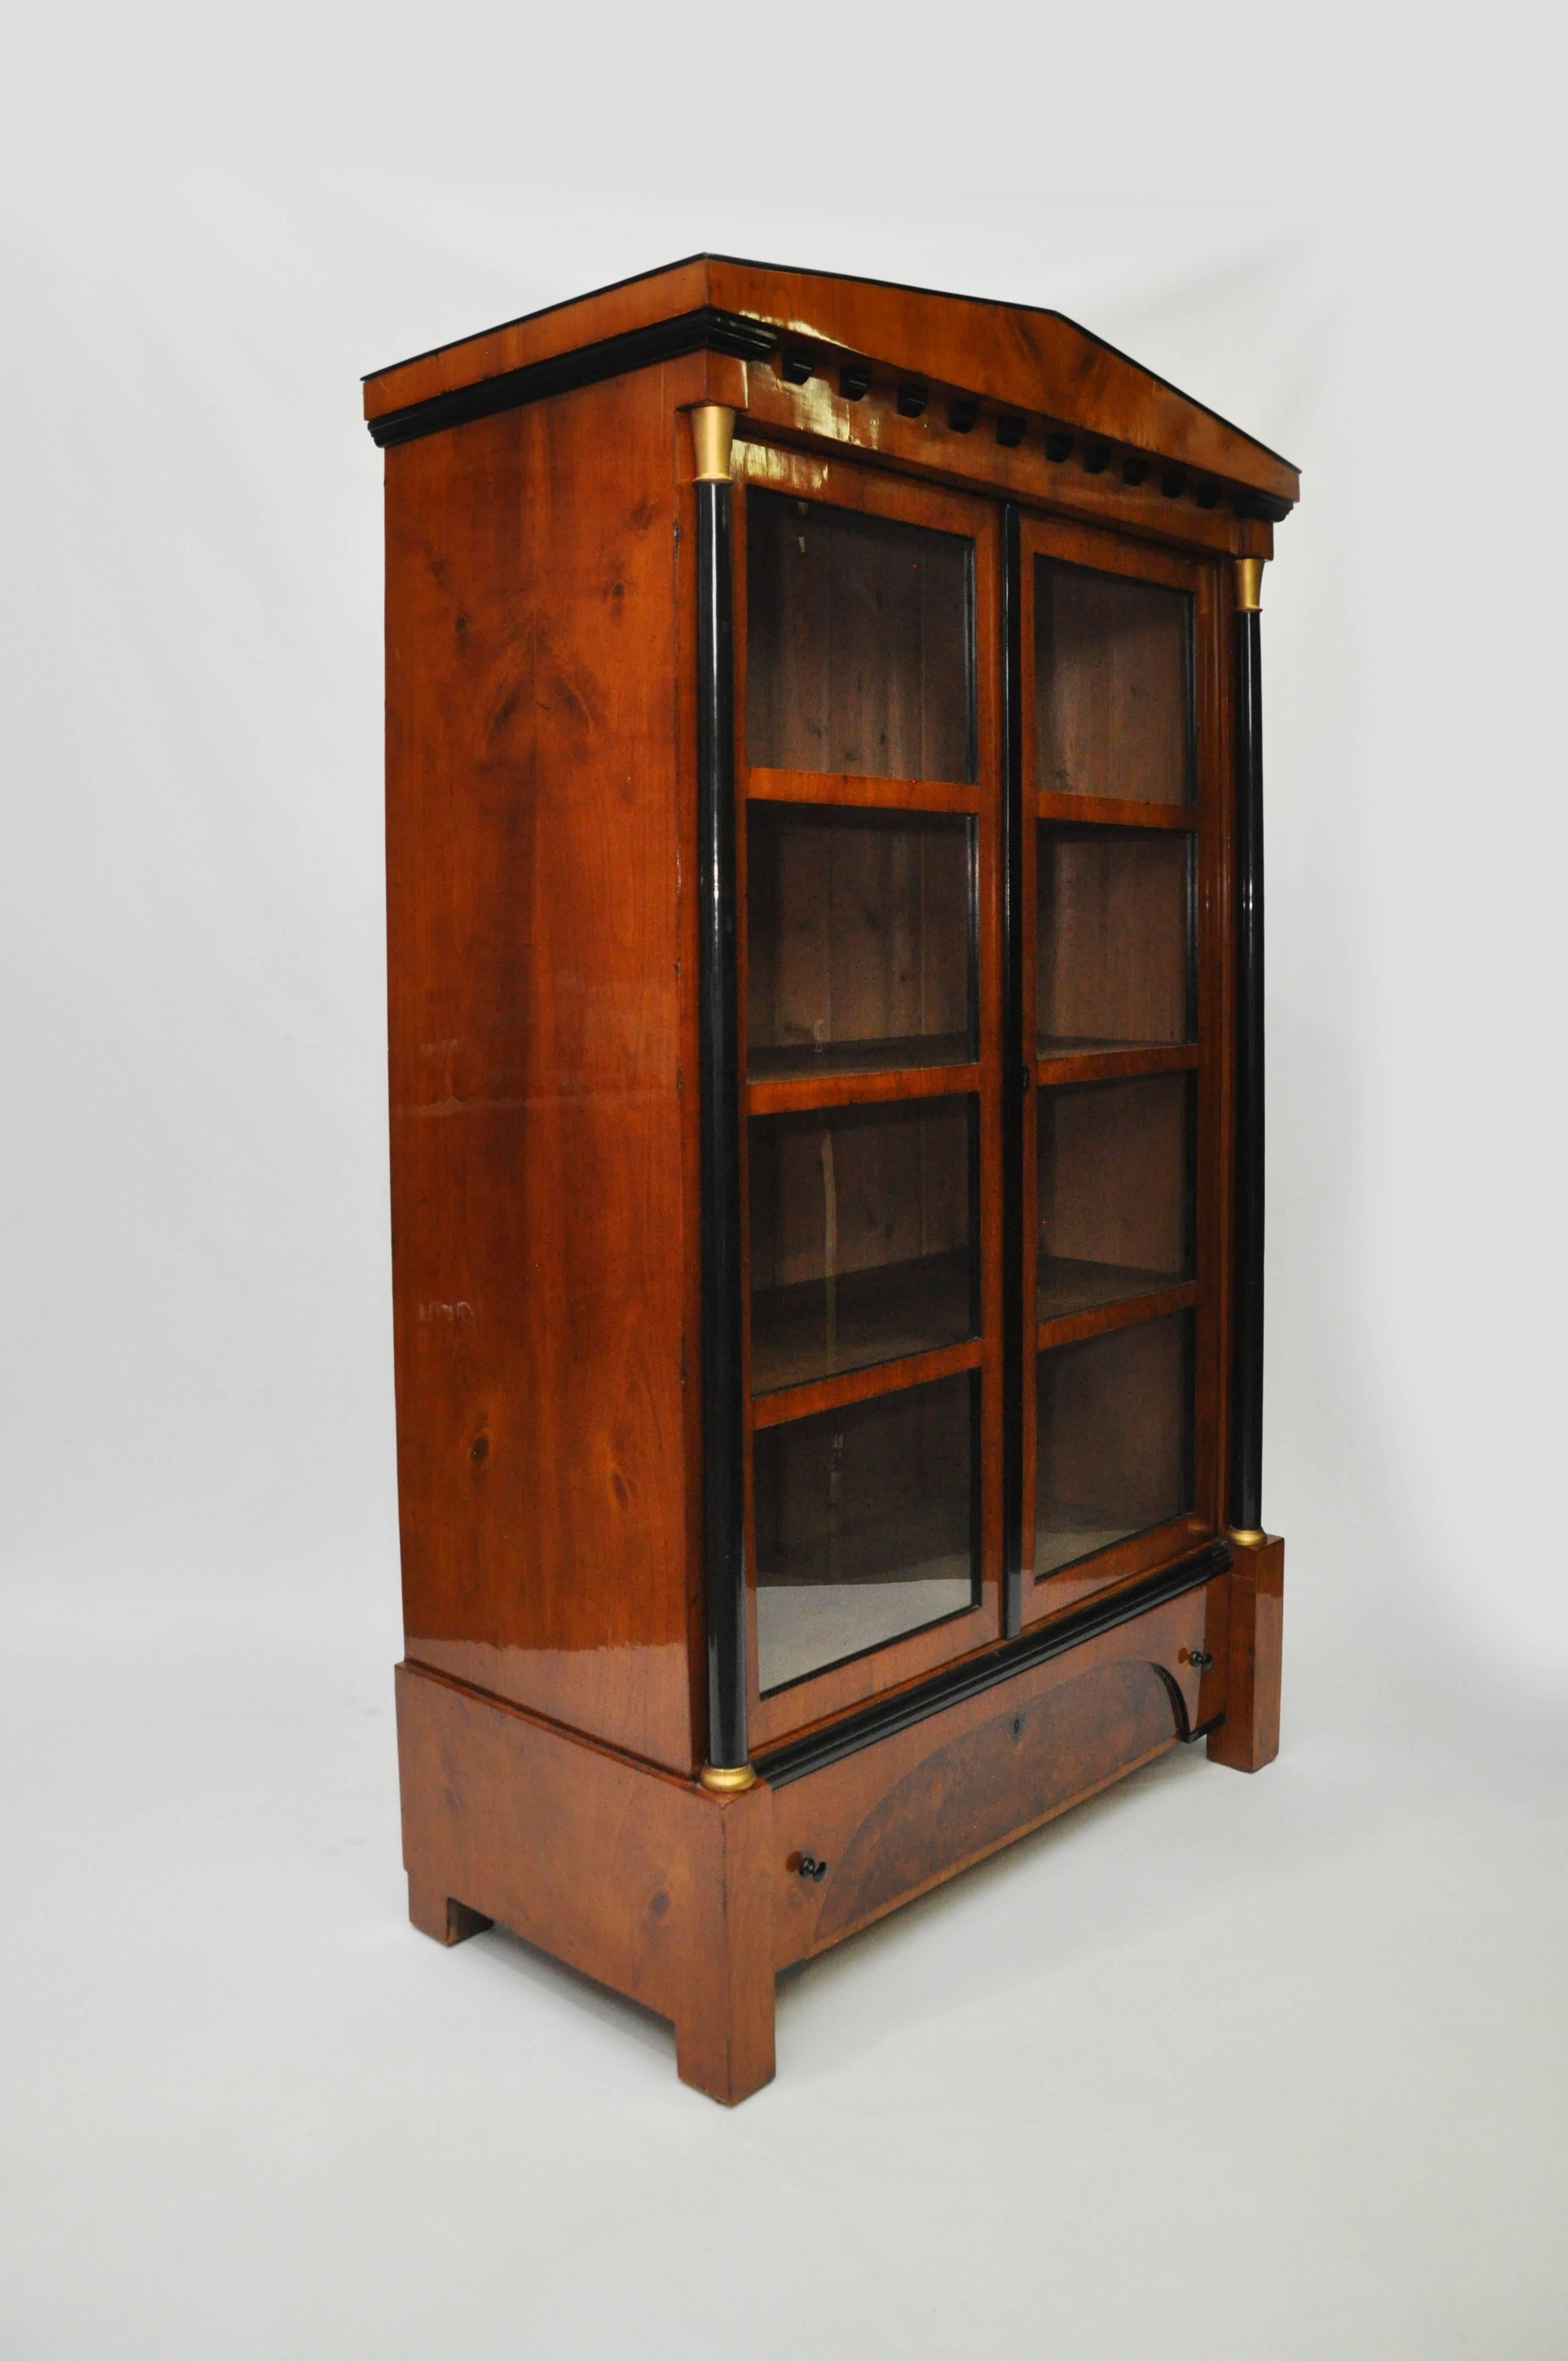 Stunning Biedermeier bookcase with dramatic architectural style pedimented top. Warm cherry veneer on pine with ebonized column and korbels. Matte gold painted capitals. Burl walnut veneer on the front of the drawer. Stationary pine shelves. The